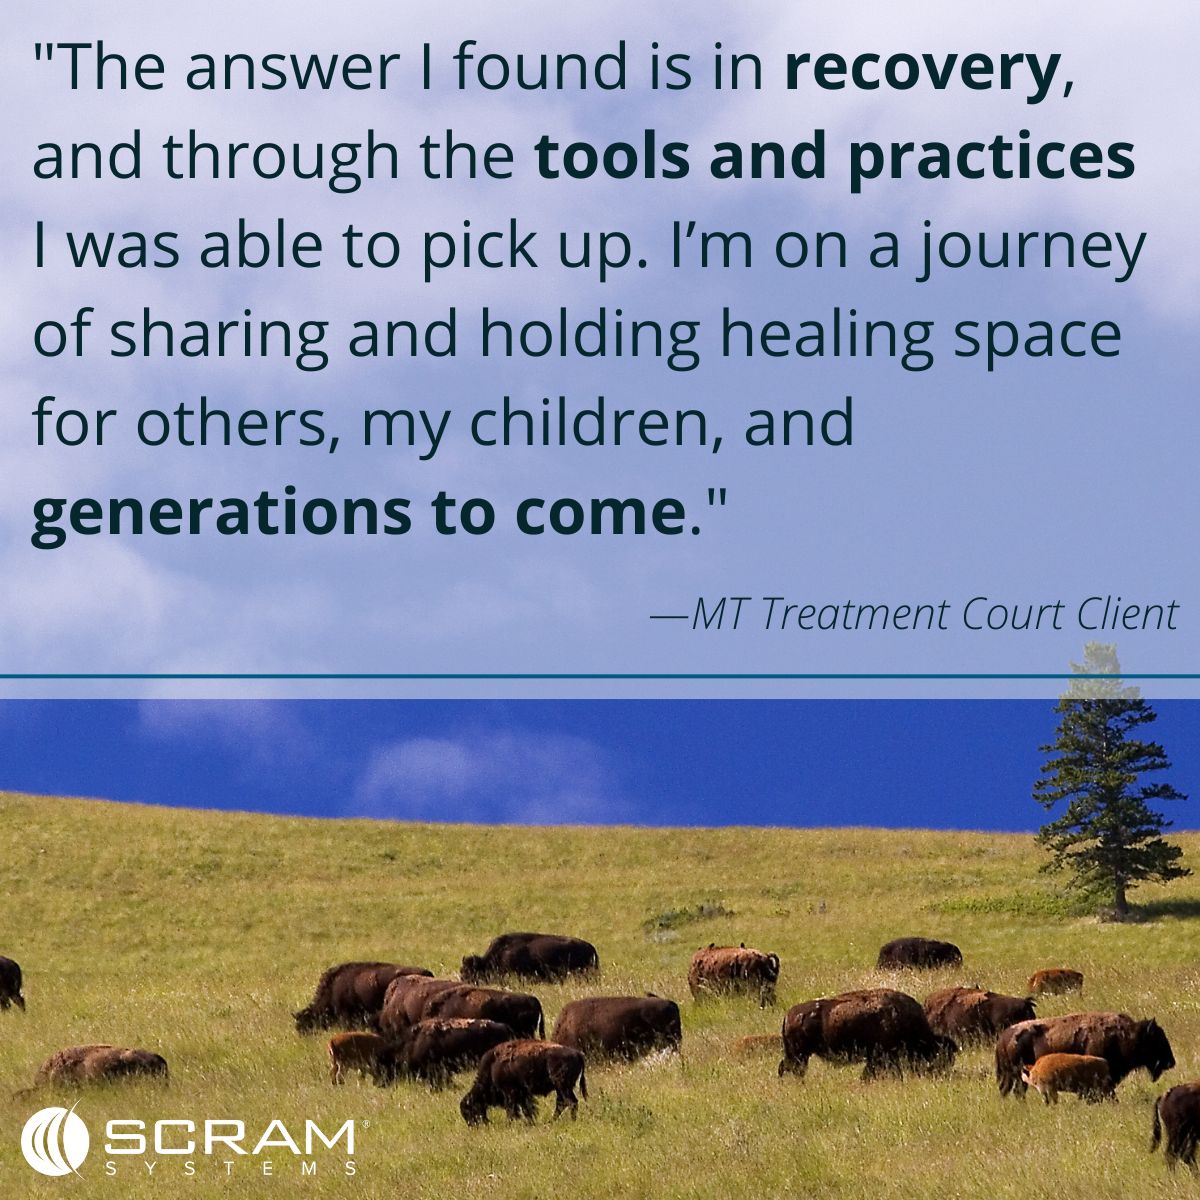 Real stories from real treatment court clients truly demonstrate the positive impact that these specialty courts have on the lives of their clients and communities. #MakingADifference #NationalTreatmentCourtMonth #Recovery